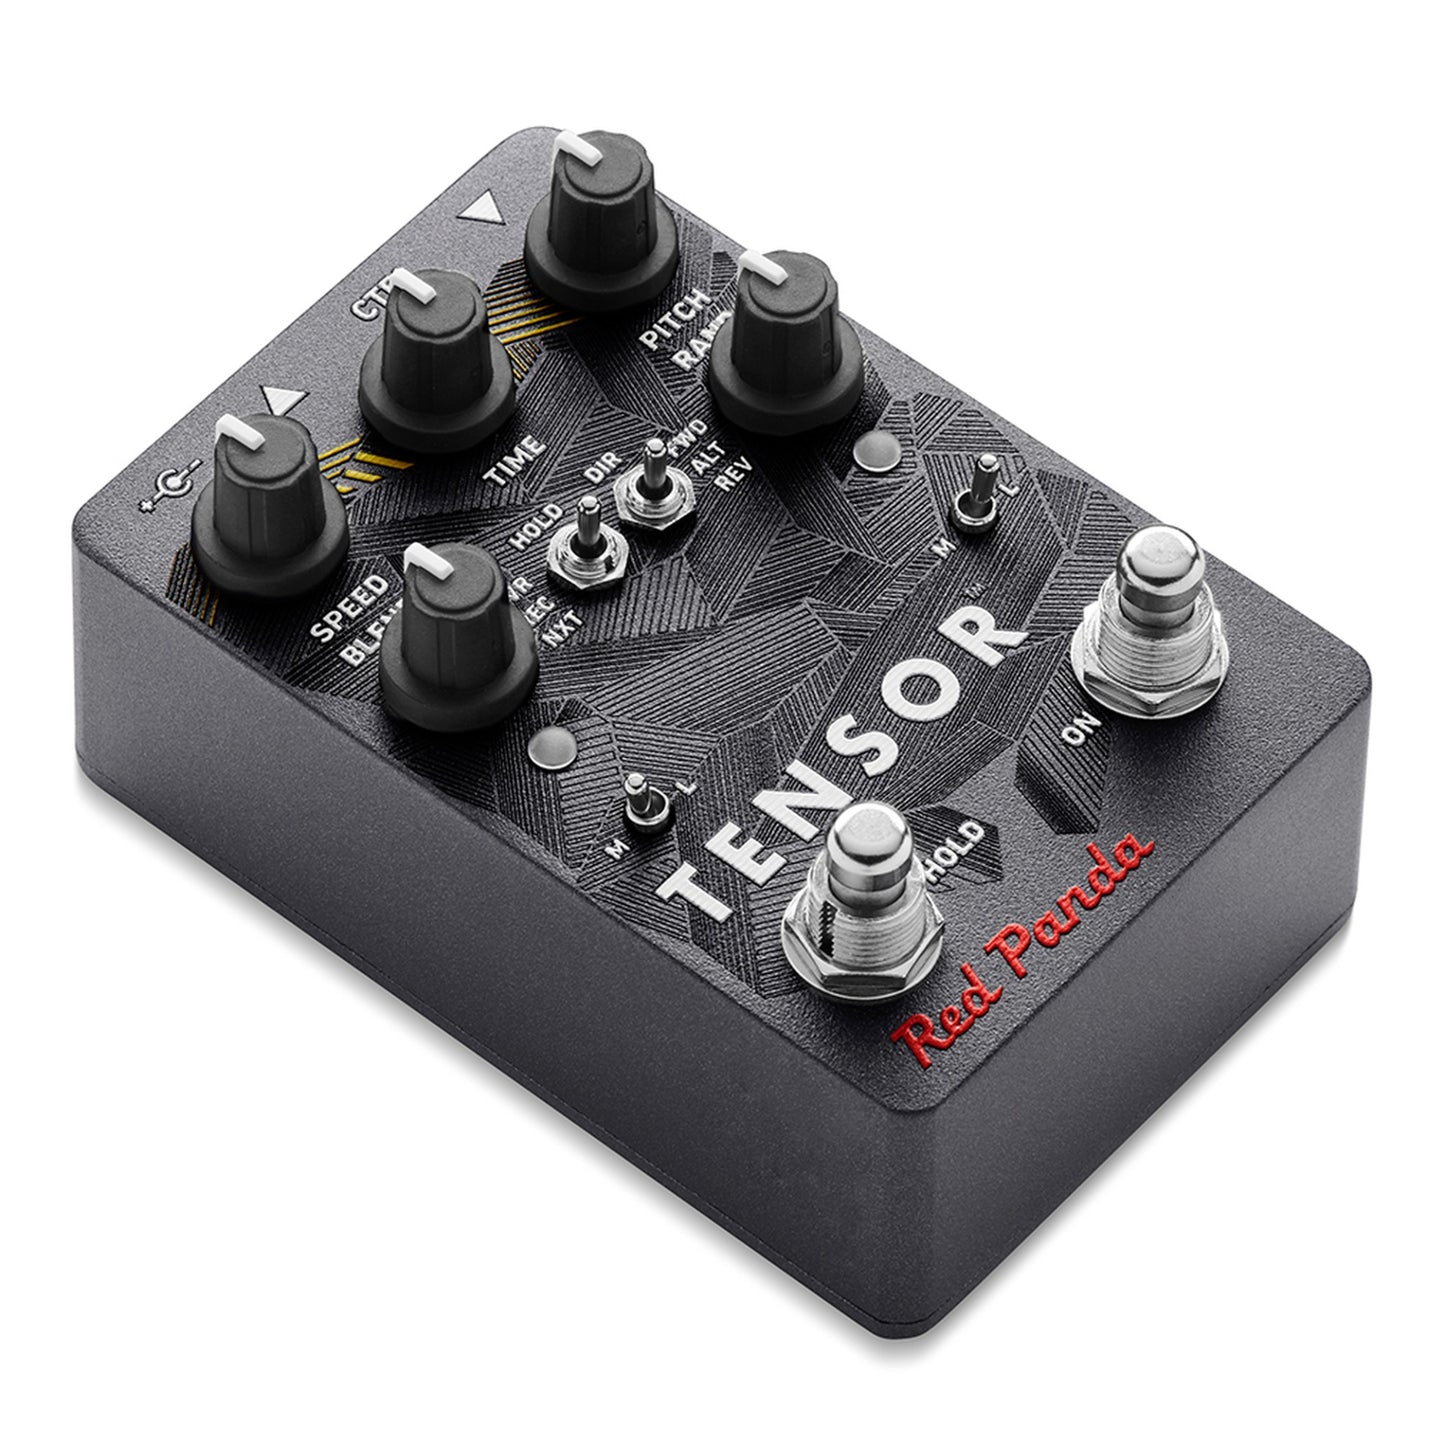 Red Panda Tensor Pitch and Time-Shifting Pedal